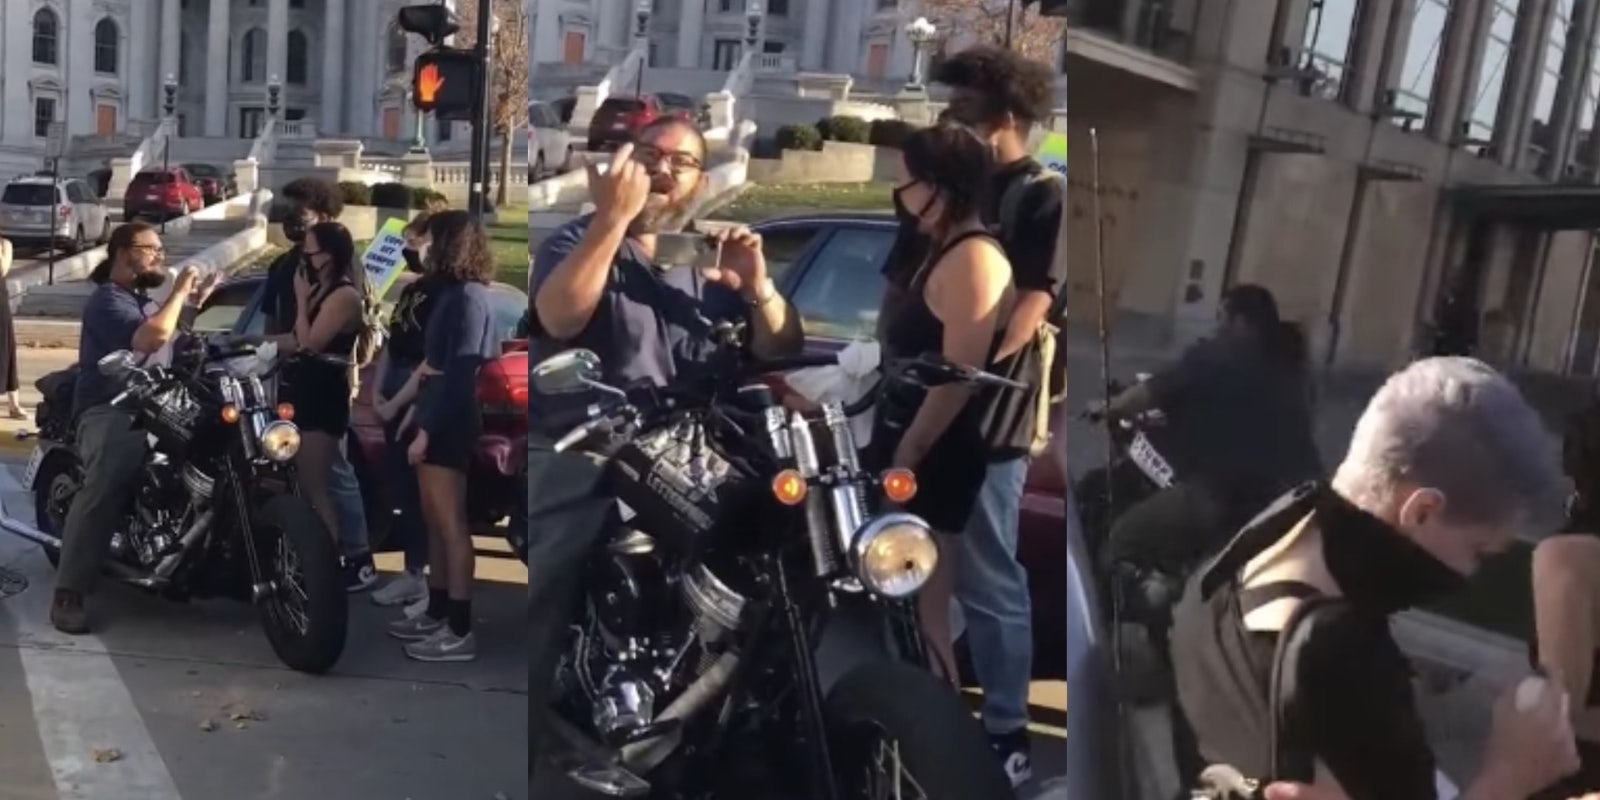 Trump supporter drives through protesters on motorcycle